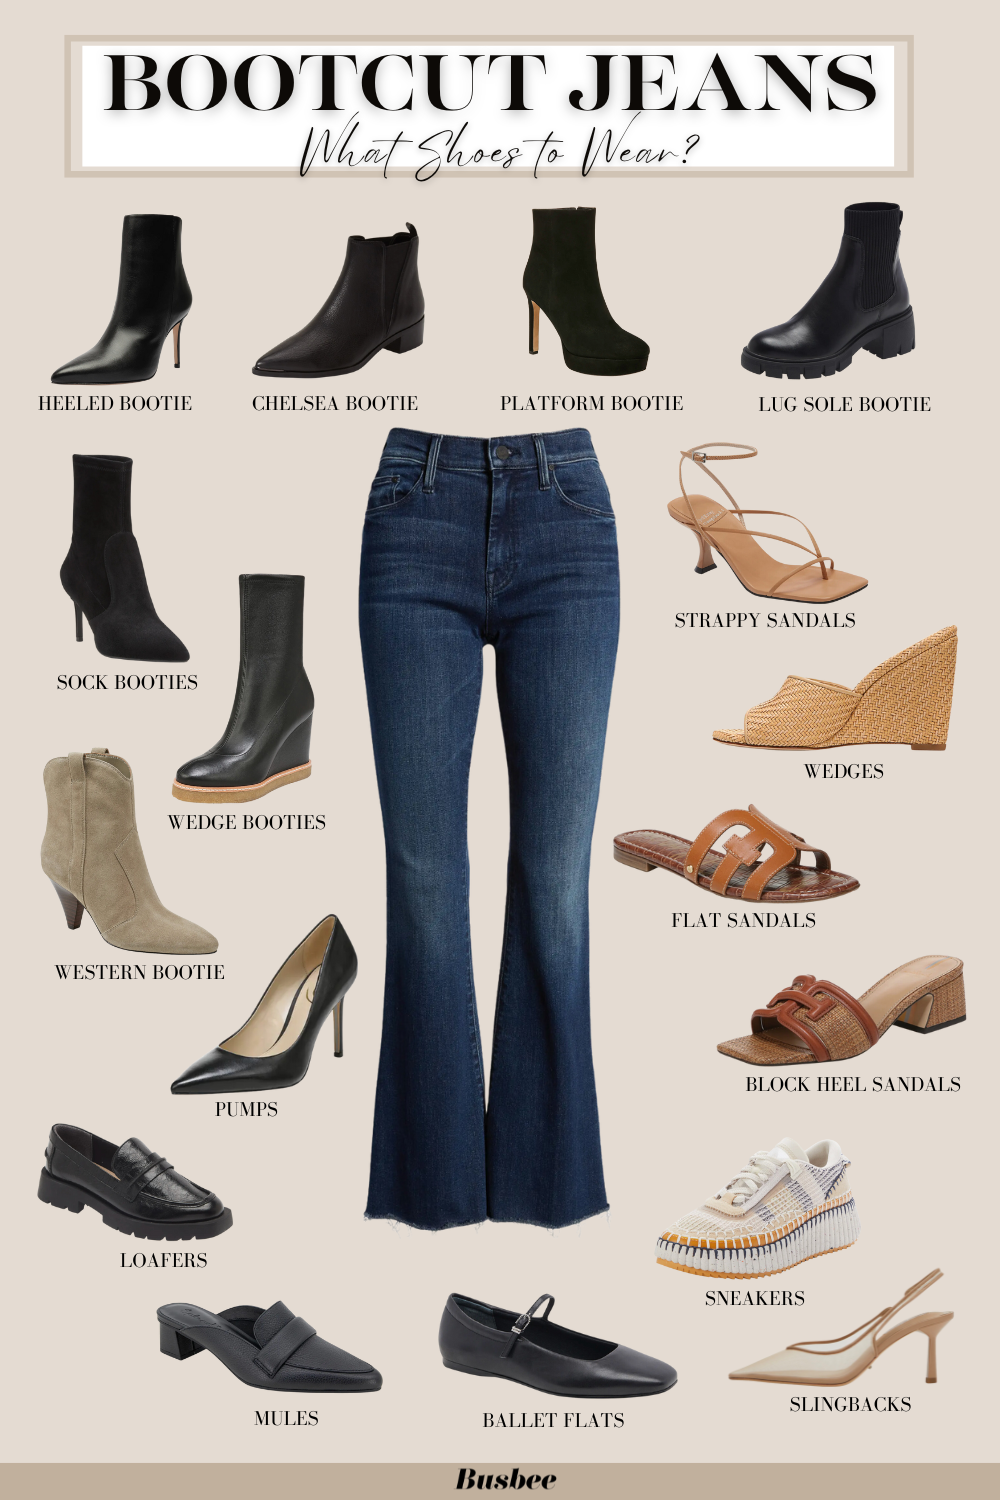 10 Types of Shoes to Wear With Bootcut Jeans | Who What Wear